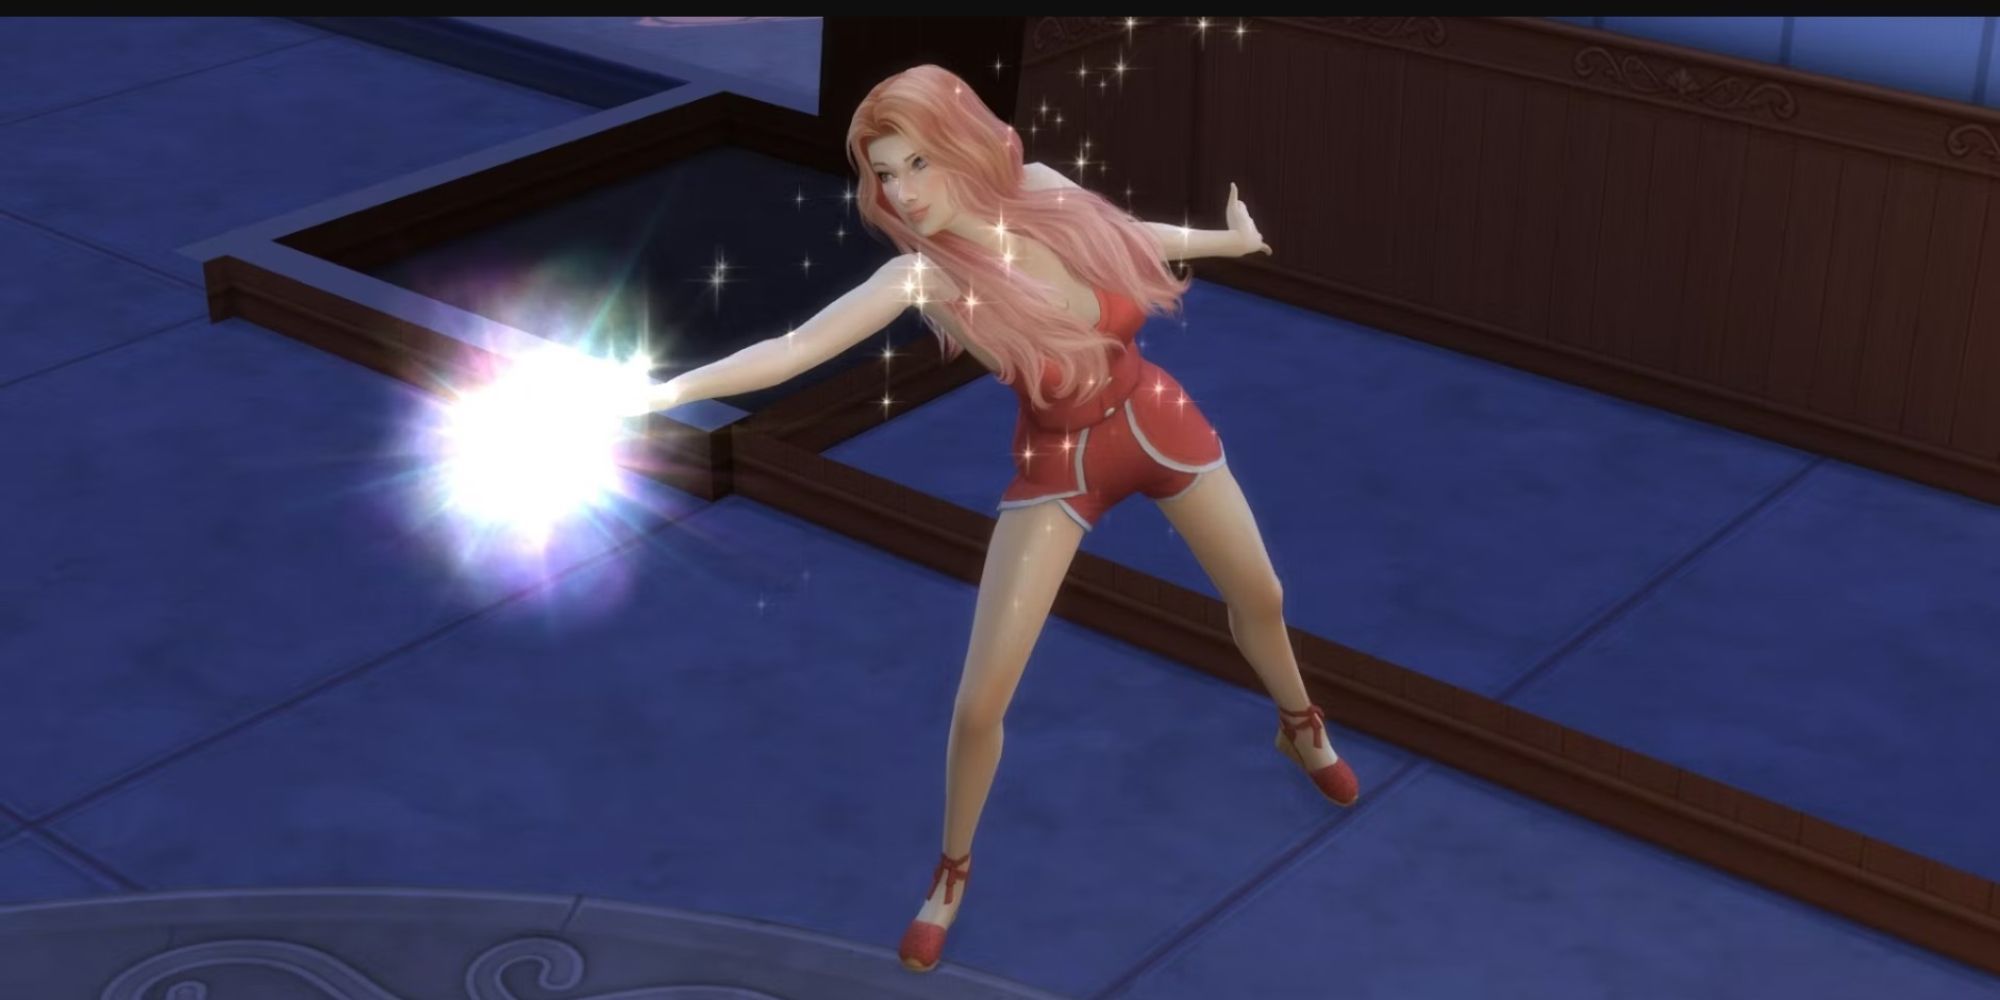 A Sim casts a spell in The Sims 4